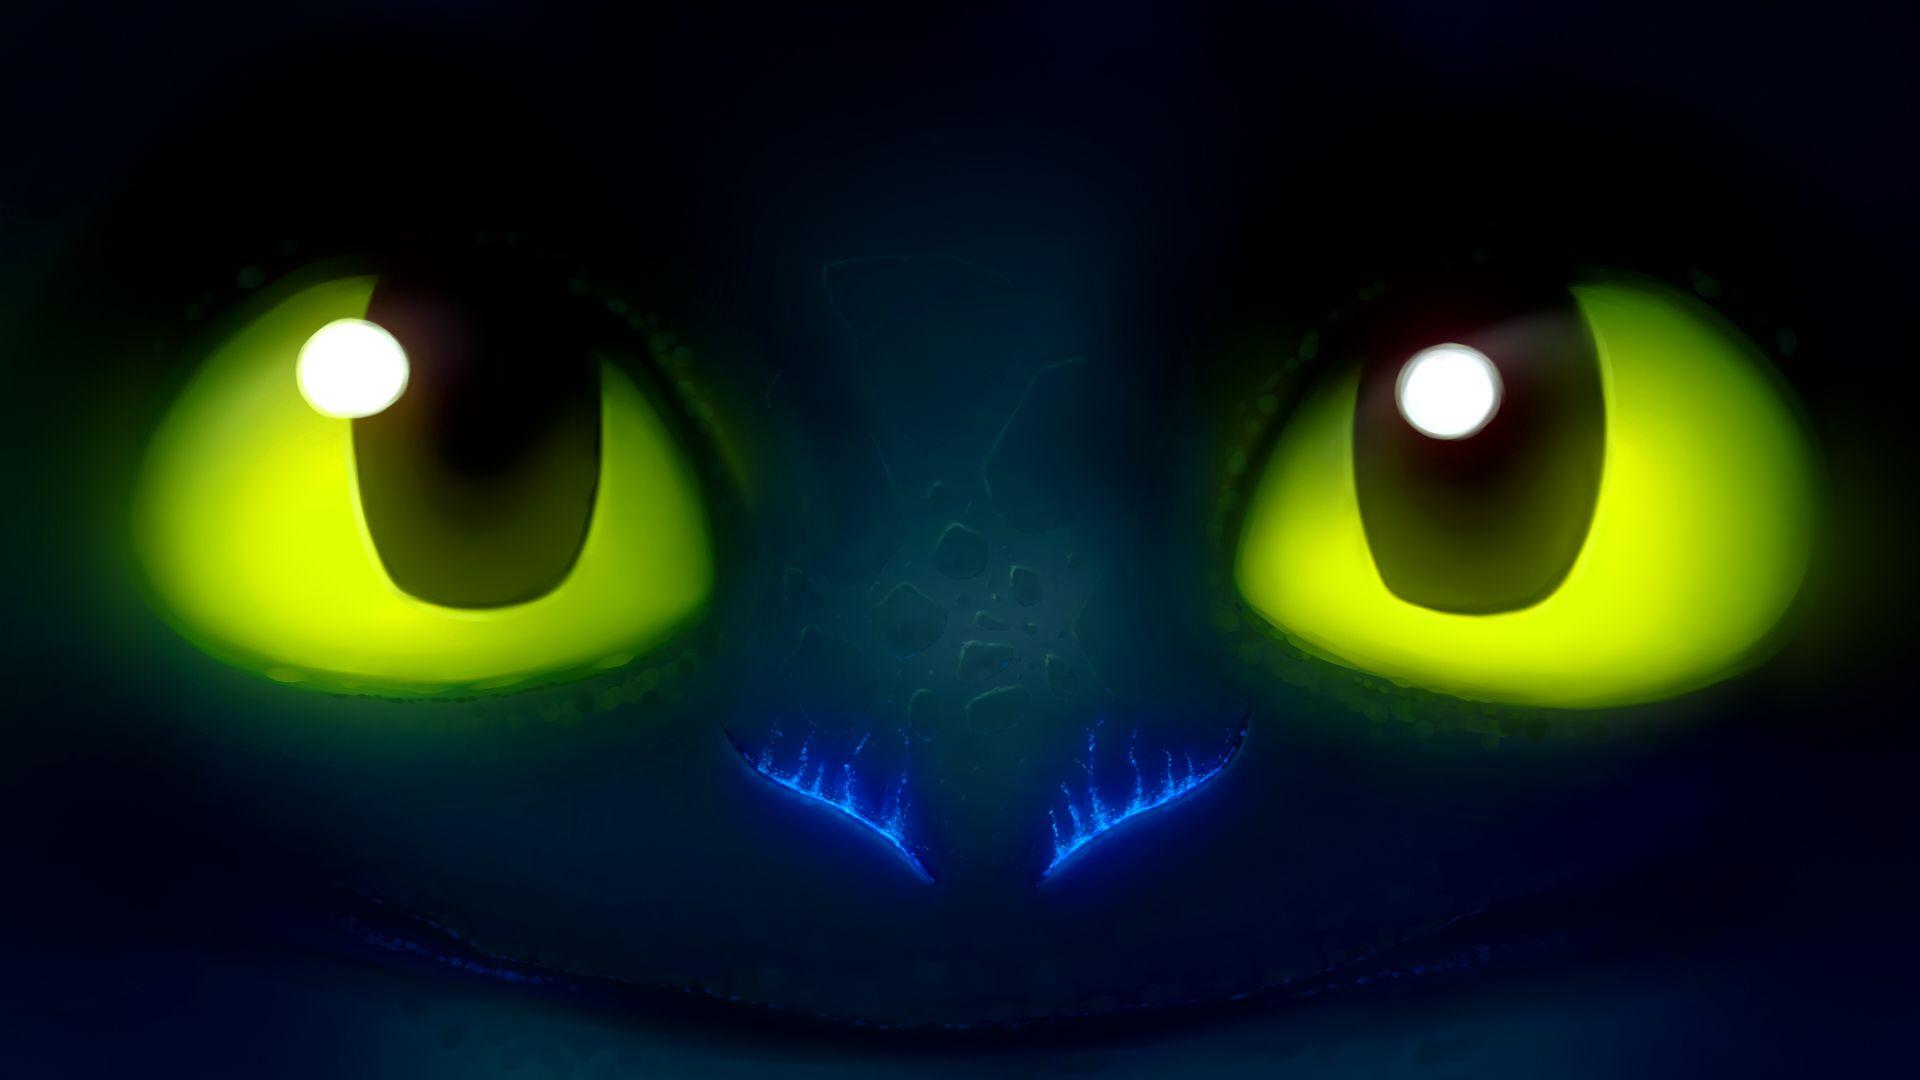 Toothless Wallpaper, HD Creative Toothless Background, Full HD